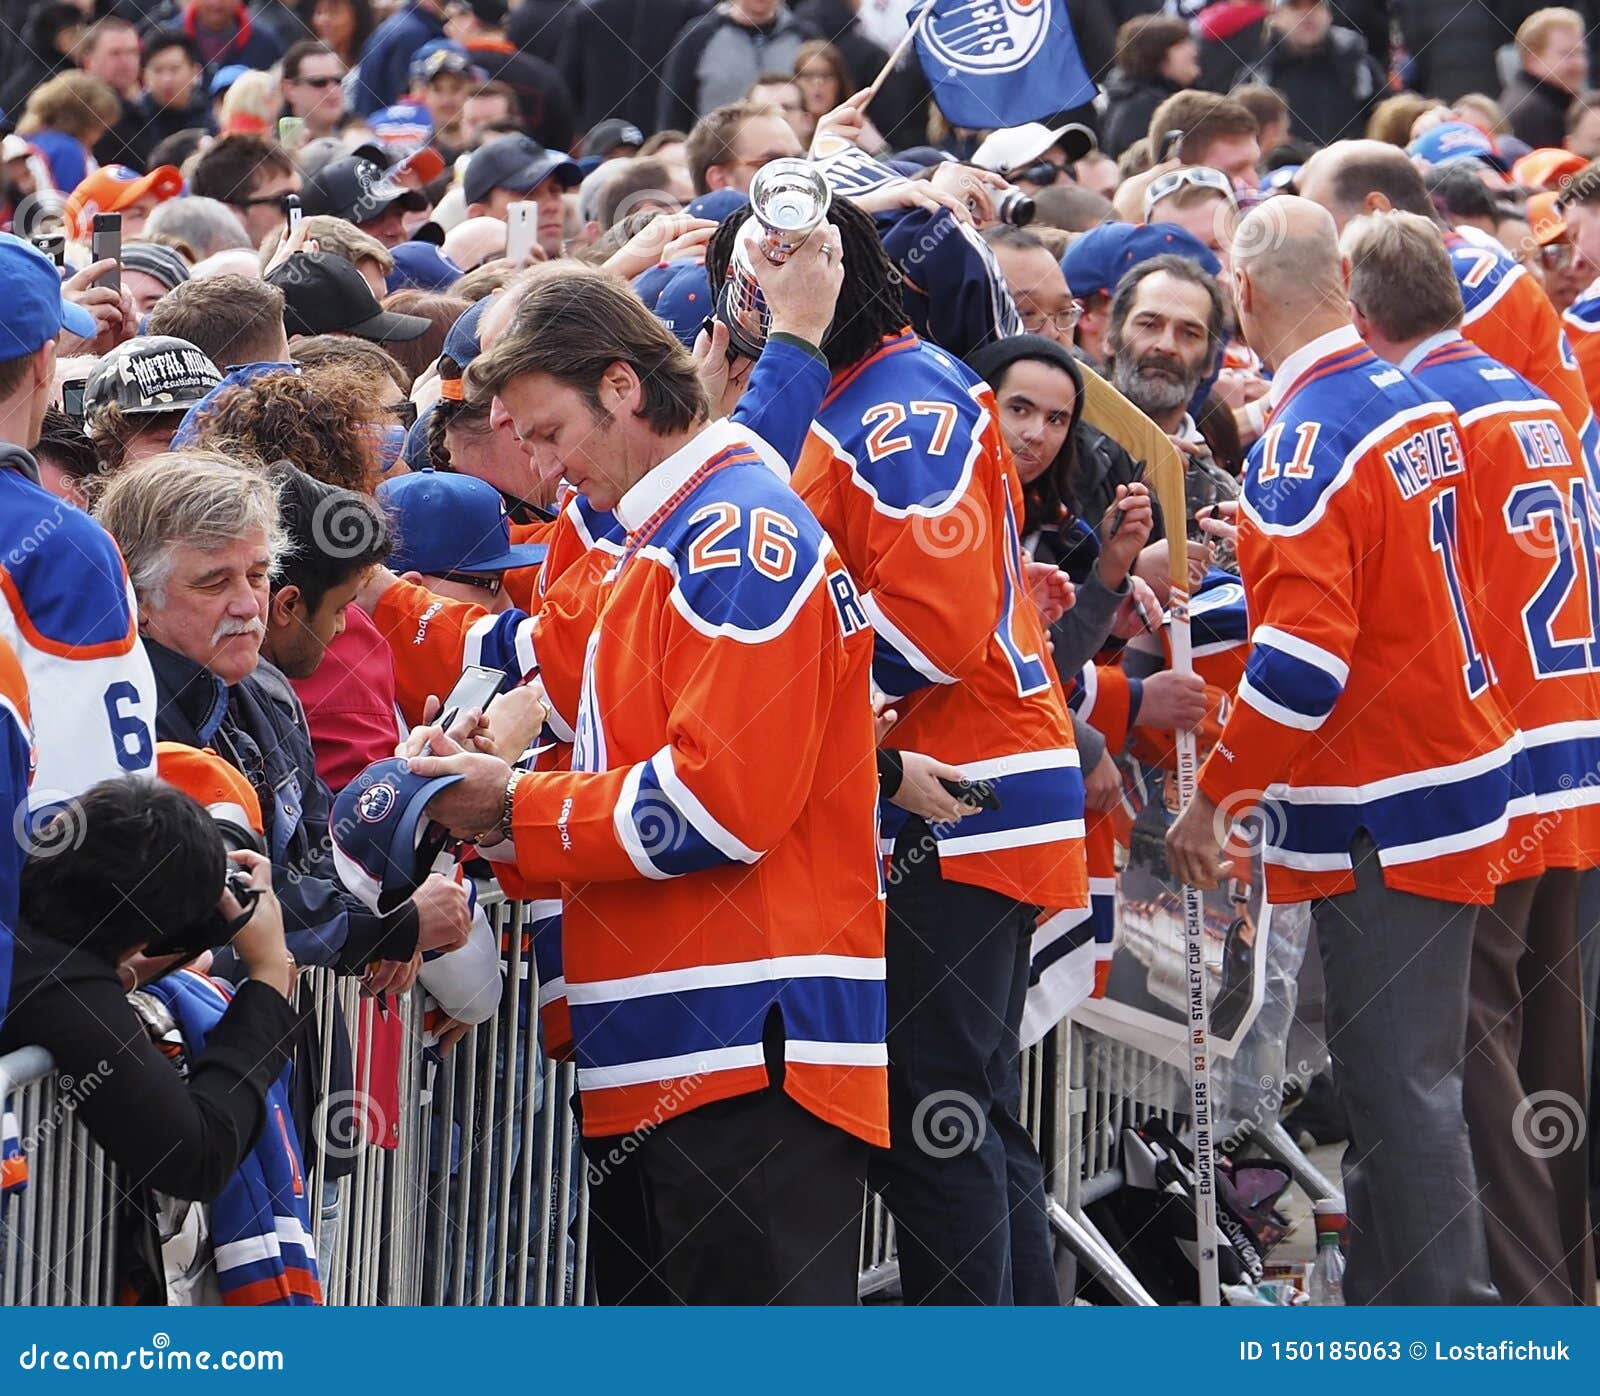 Retired Hockey Players Signing Autographs for Fans Visiting Edmonton  Alberta Editorial Stock Photo - Image of hockey, games: 150185063 